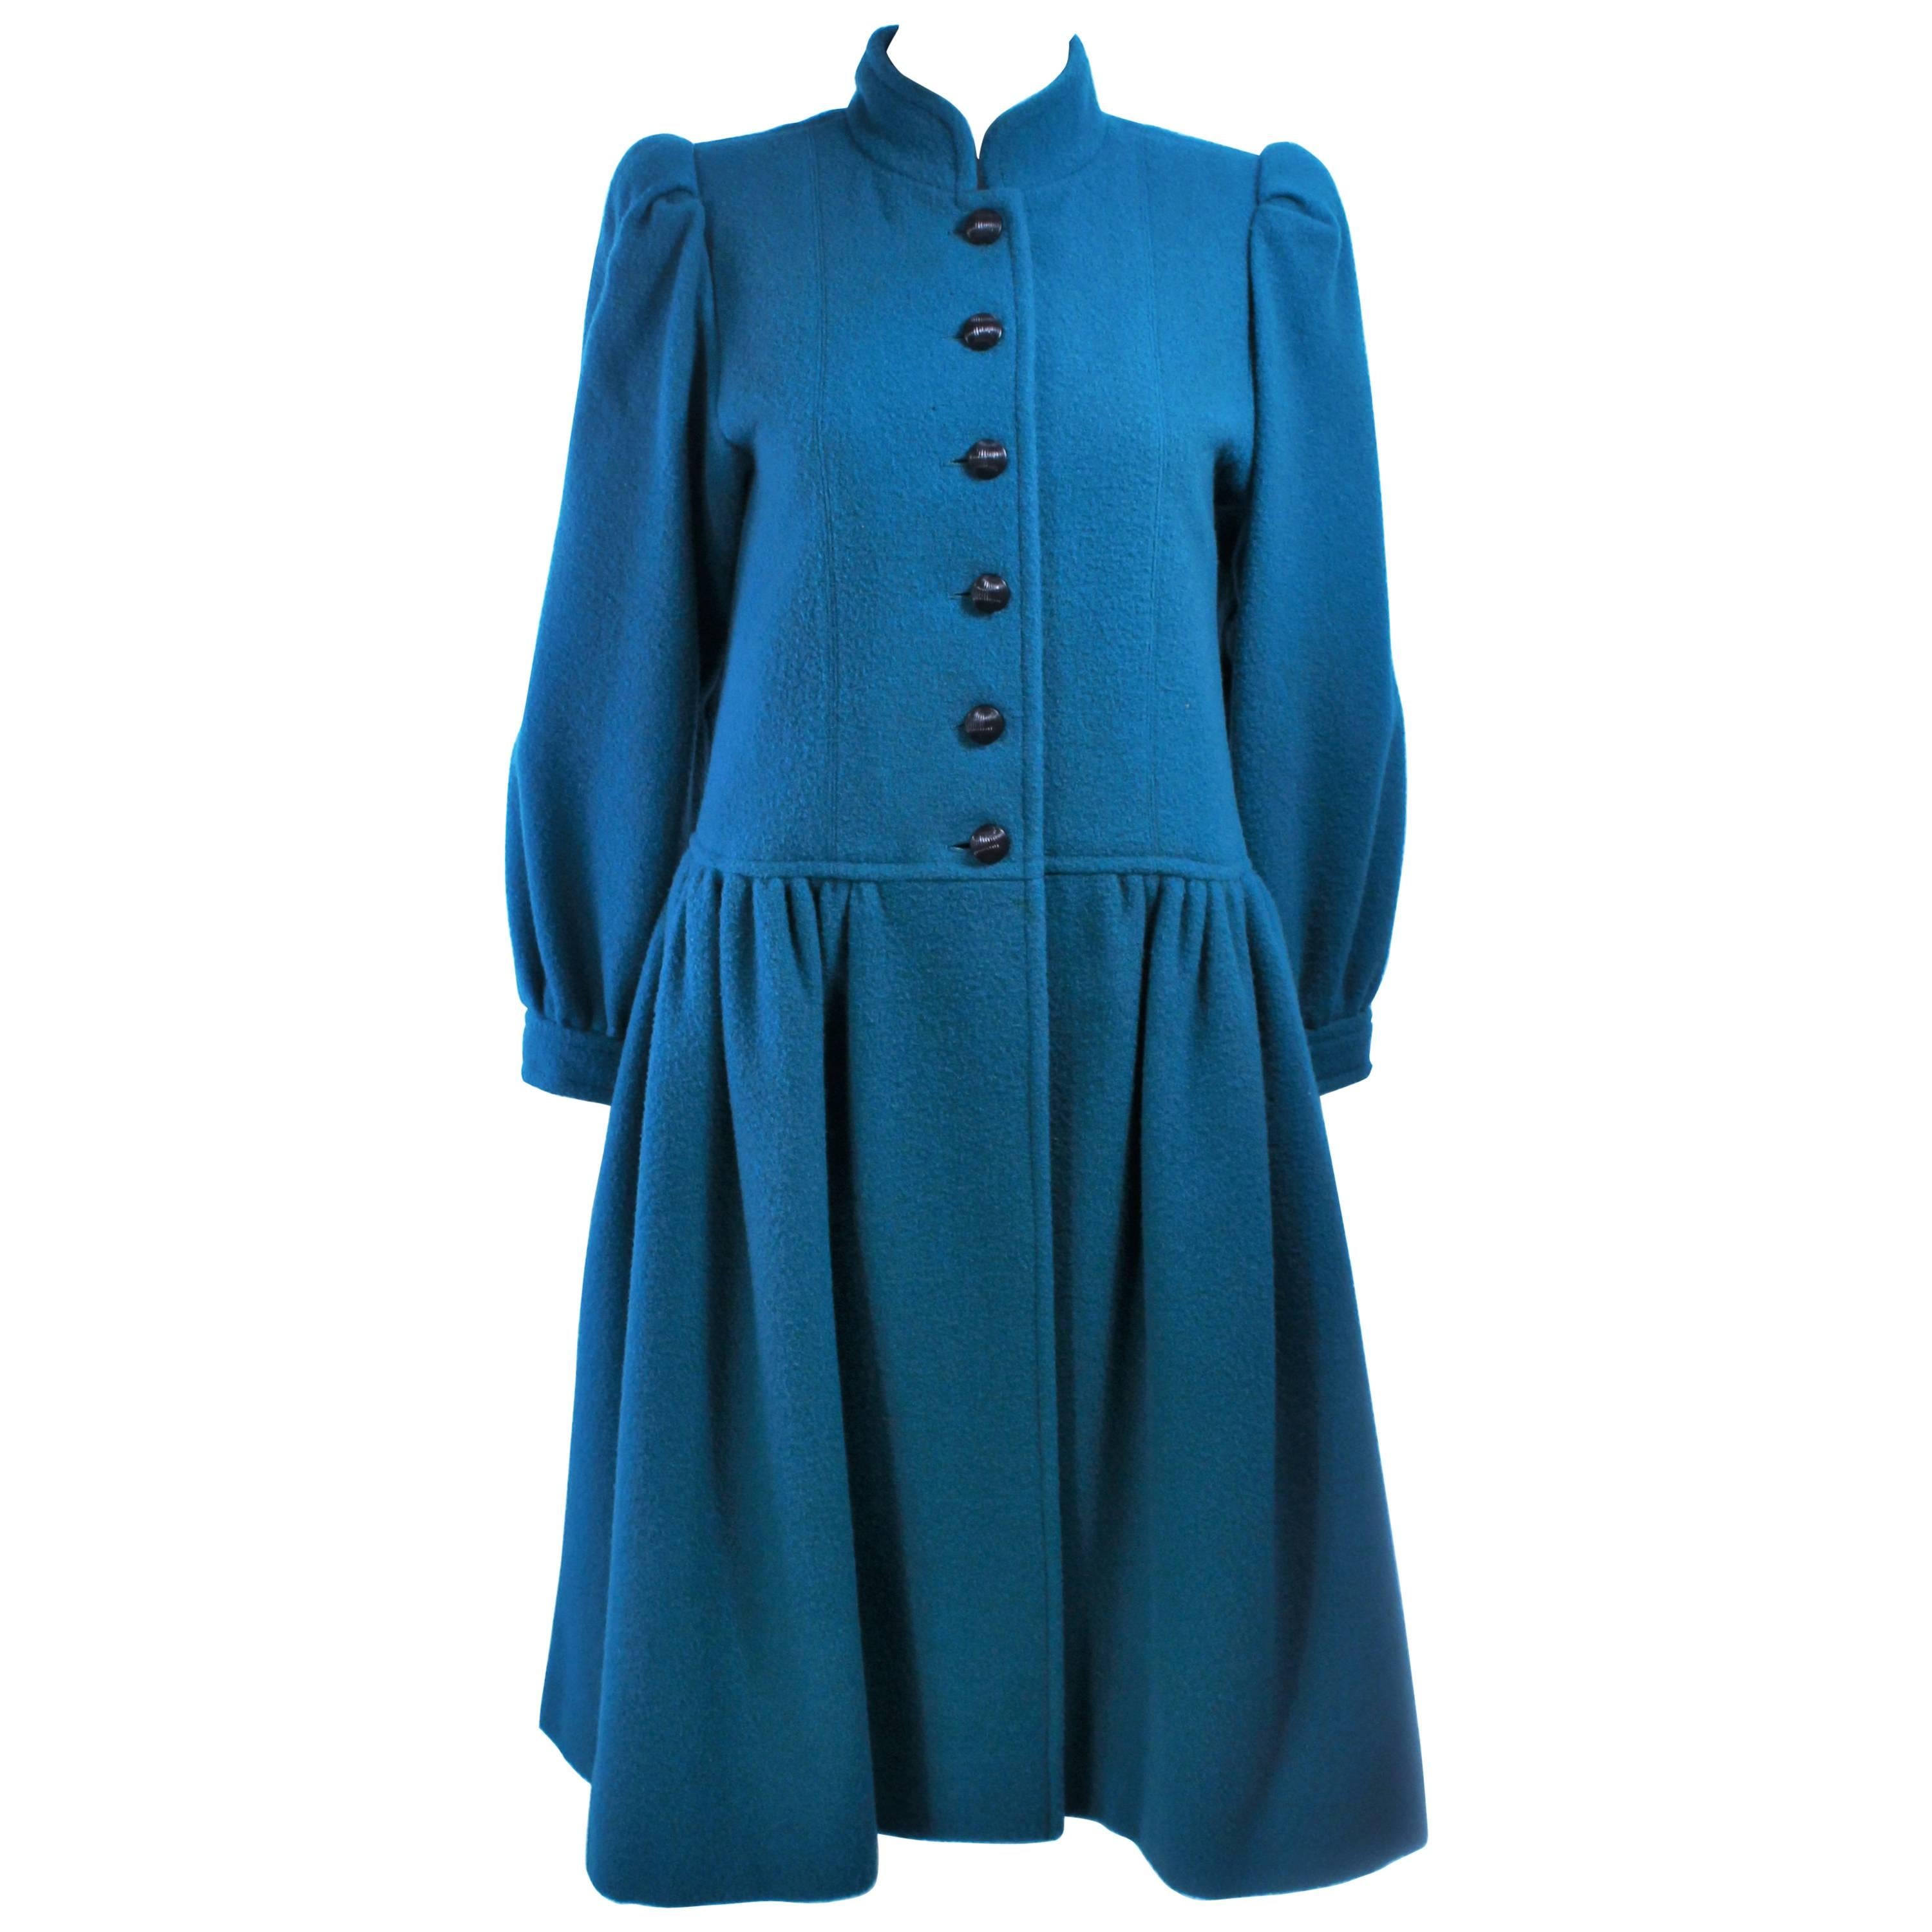 YVES SAINT LAURENT Turquoise Wool Coat Size 6 For Sale